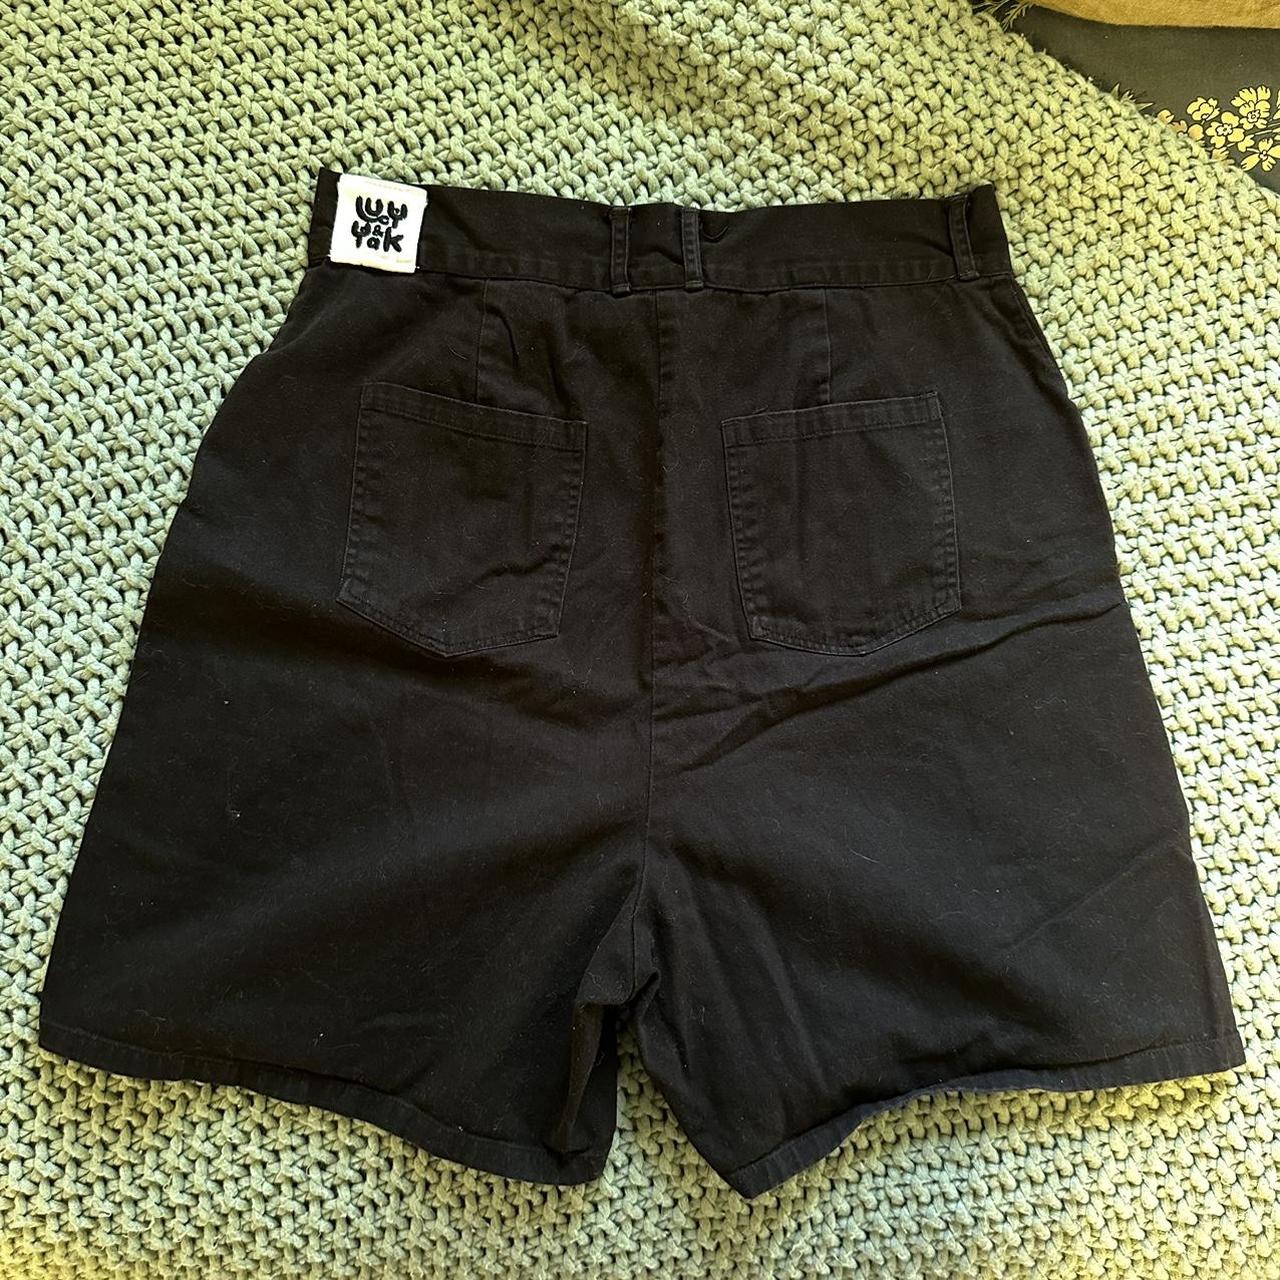 Lucy and Yak Black Addison Shorts W32 L32 These... - Depop